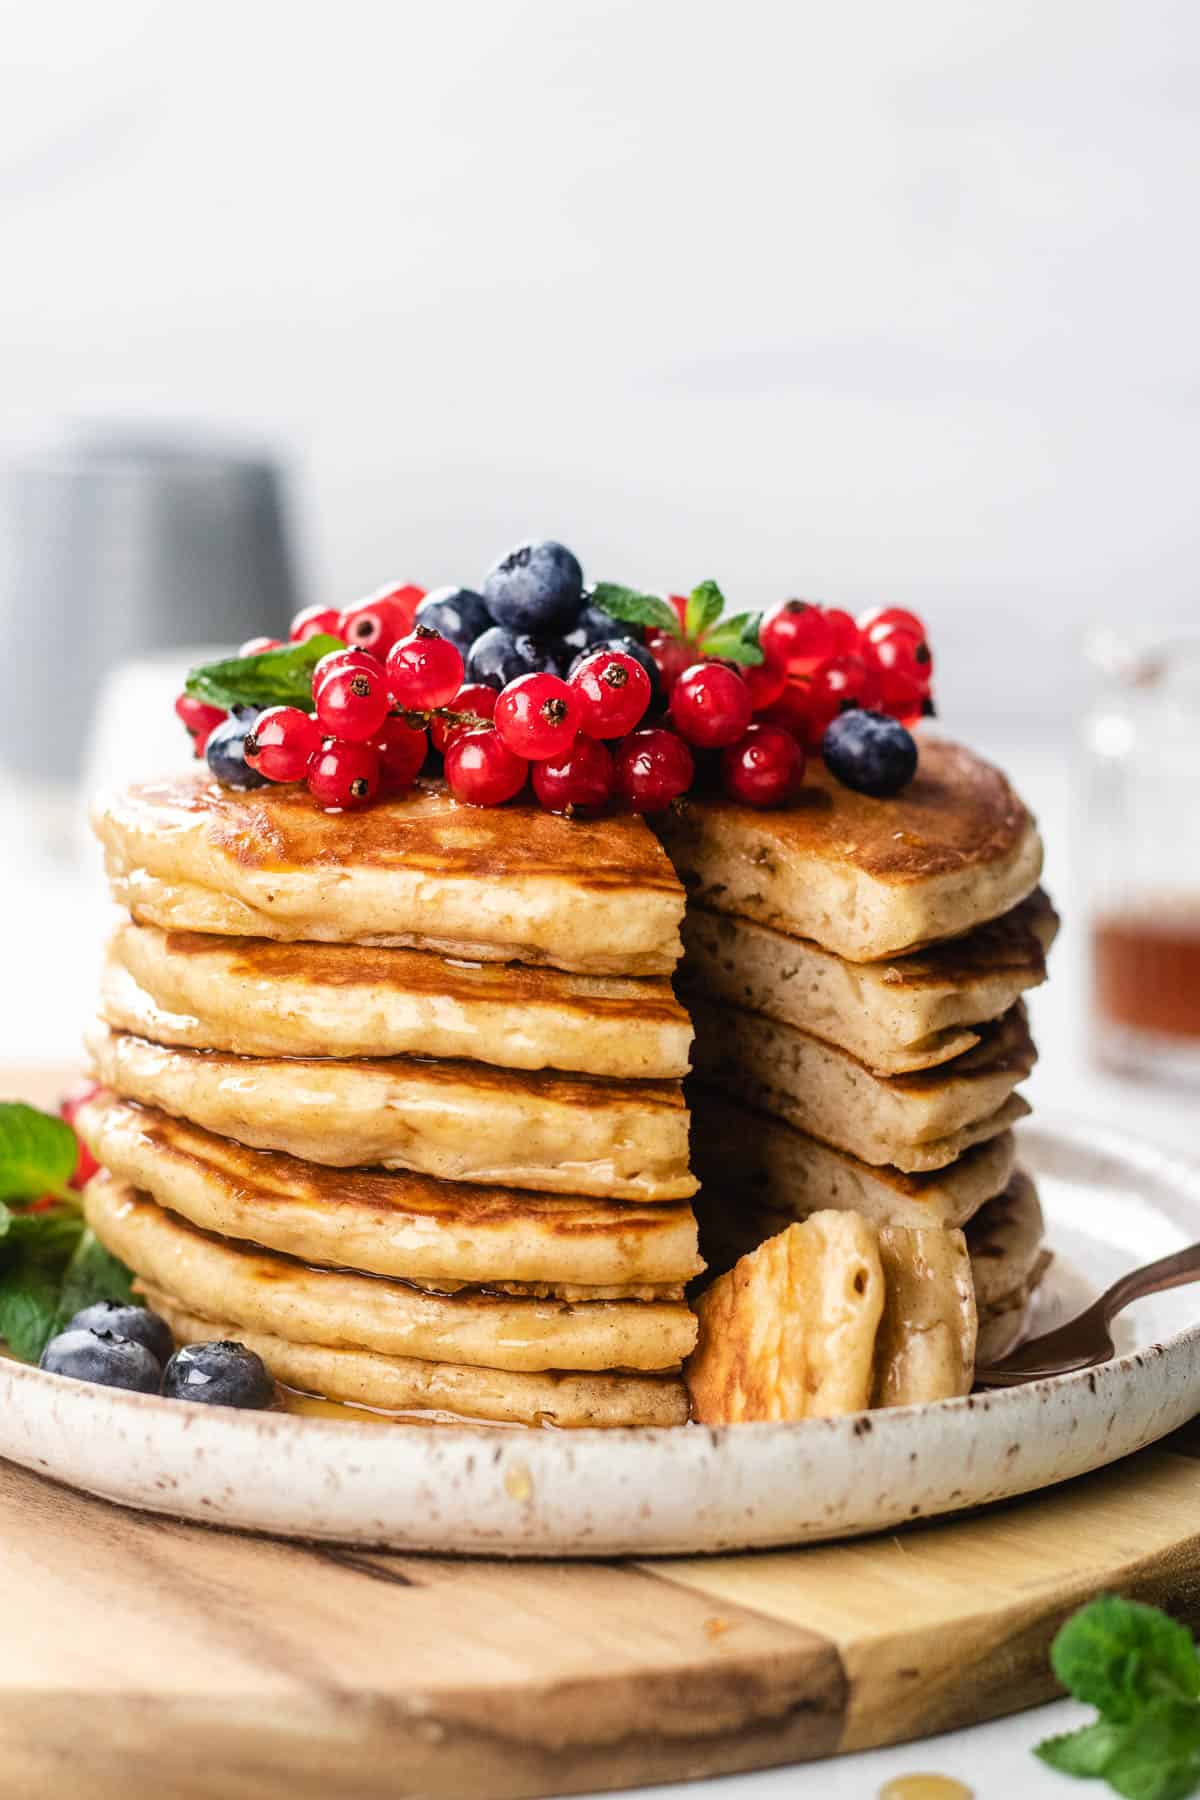 A stack of pancakes, topped with berries on a plate.